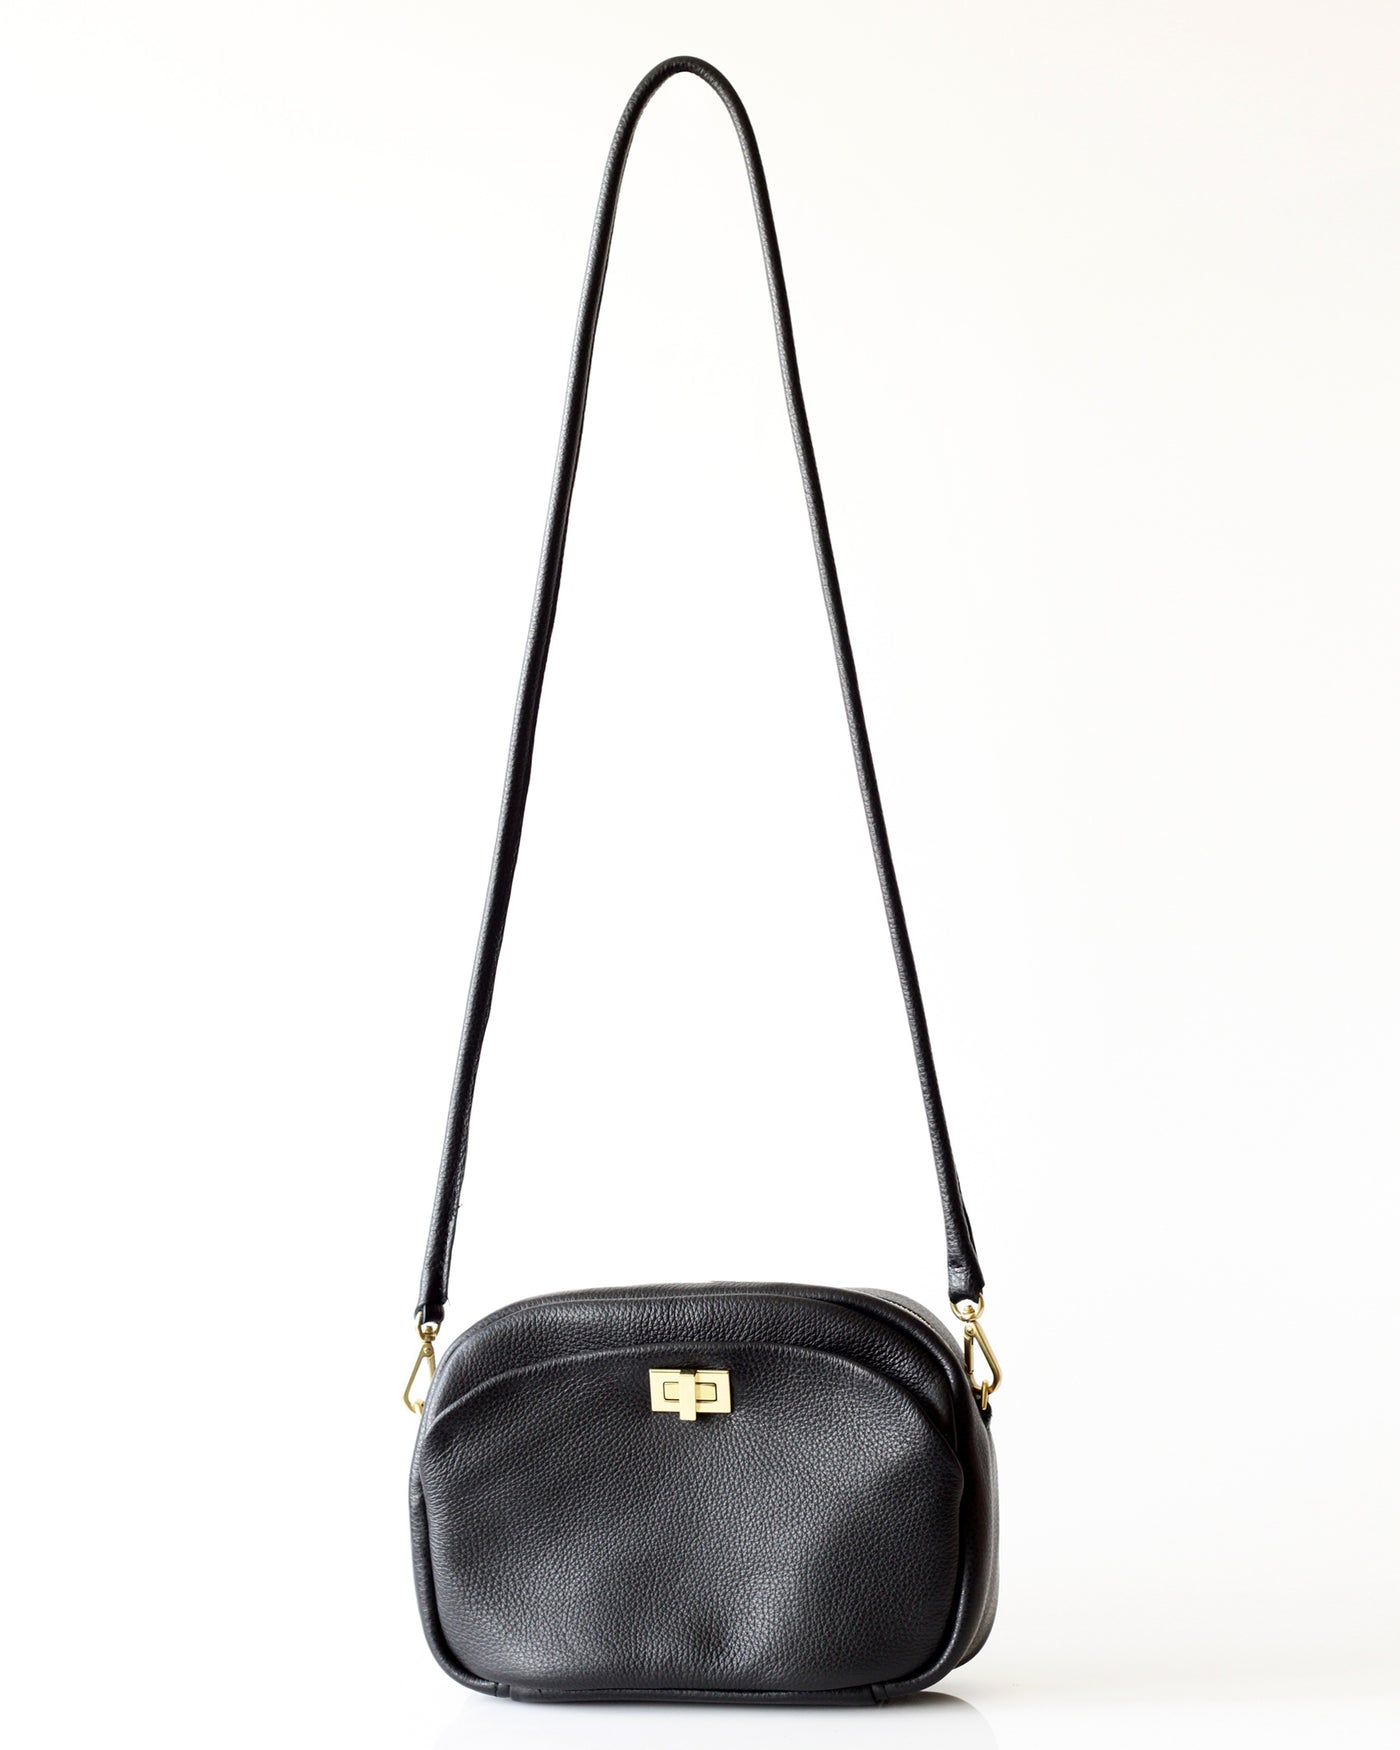 Calla Crossbody - Opelle bag Permanent Collection - Opelle leather handbag handcrafted leather bag toronto Canada